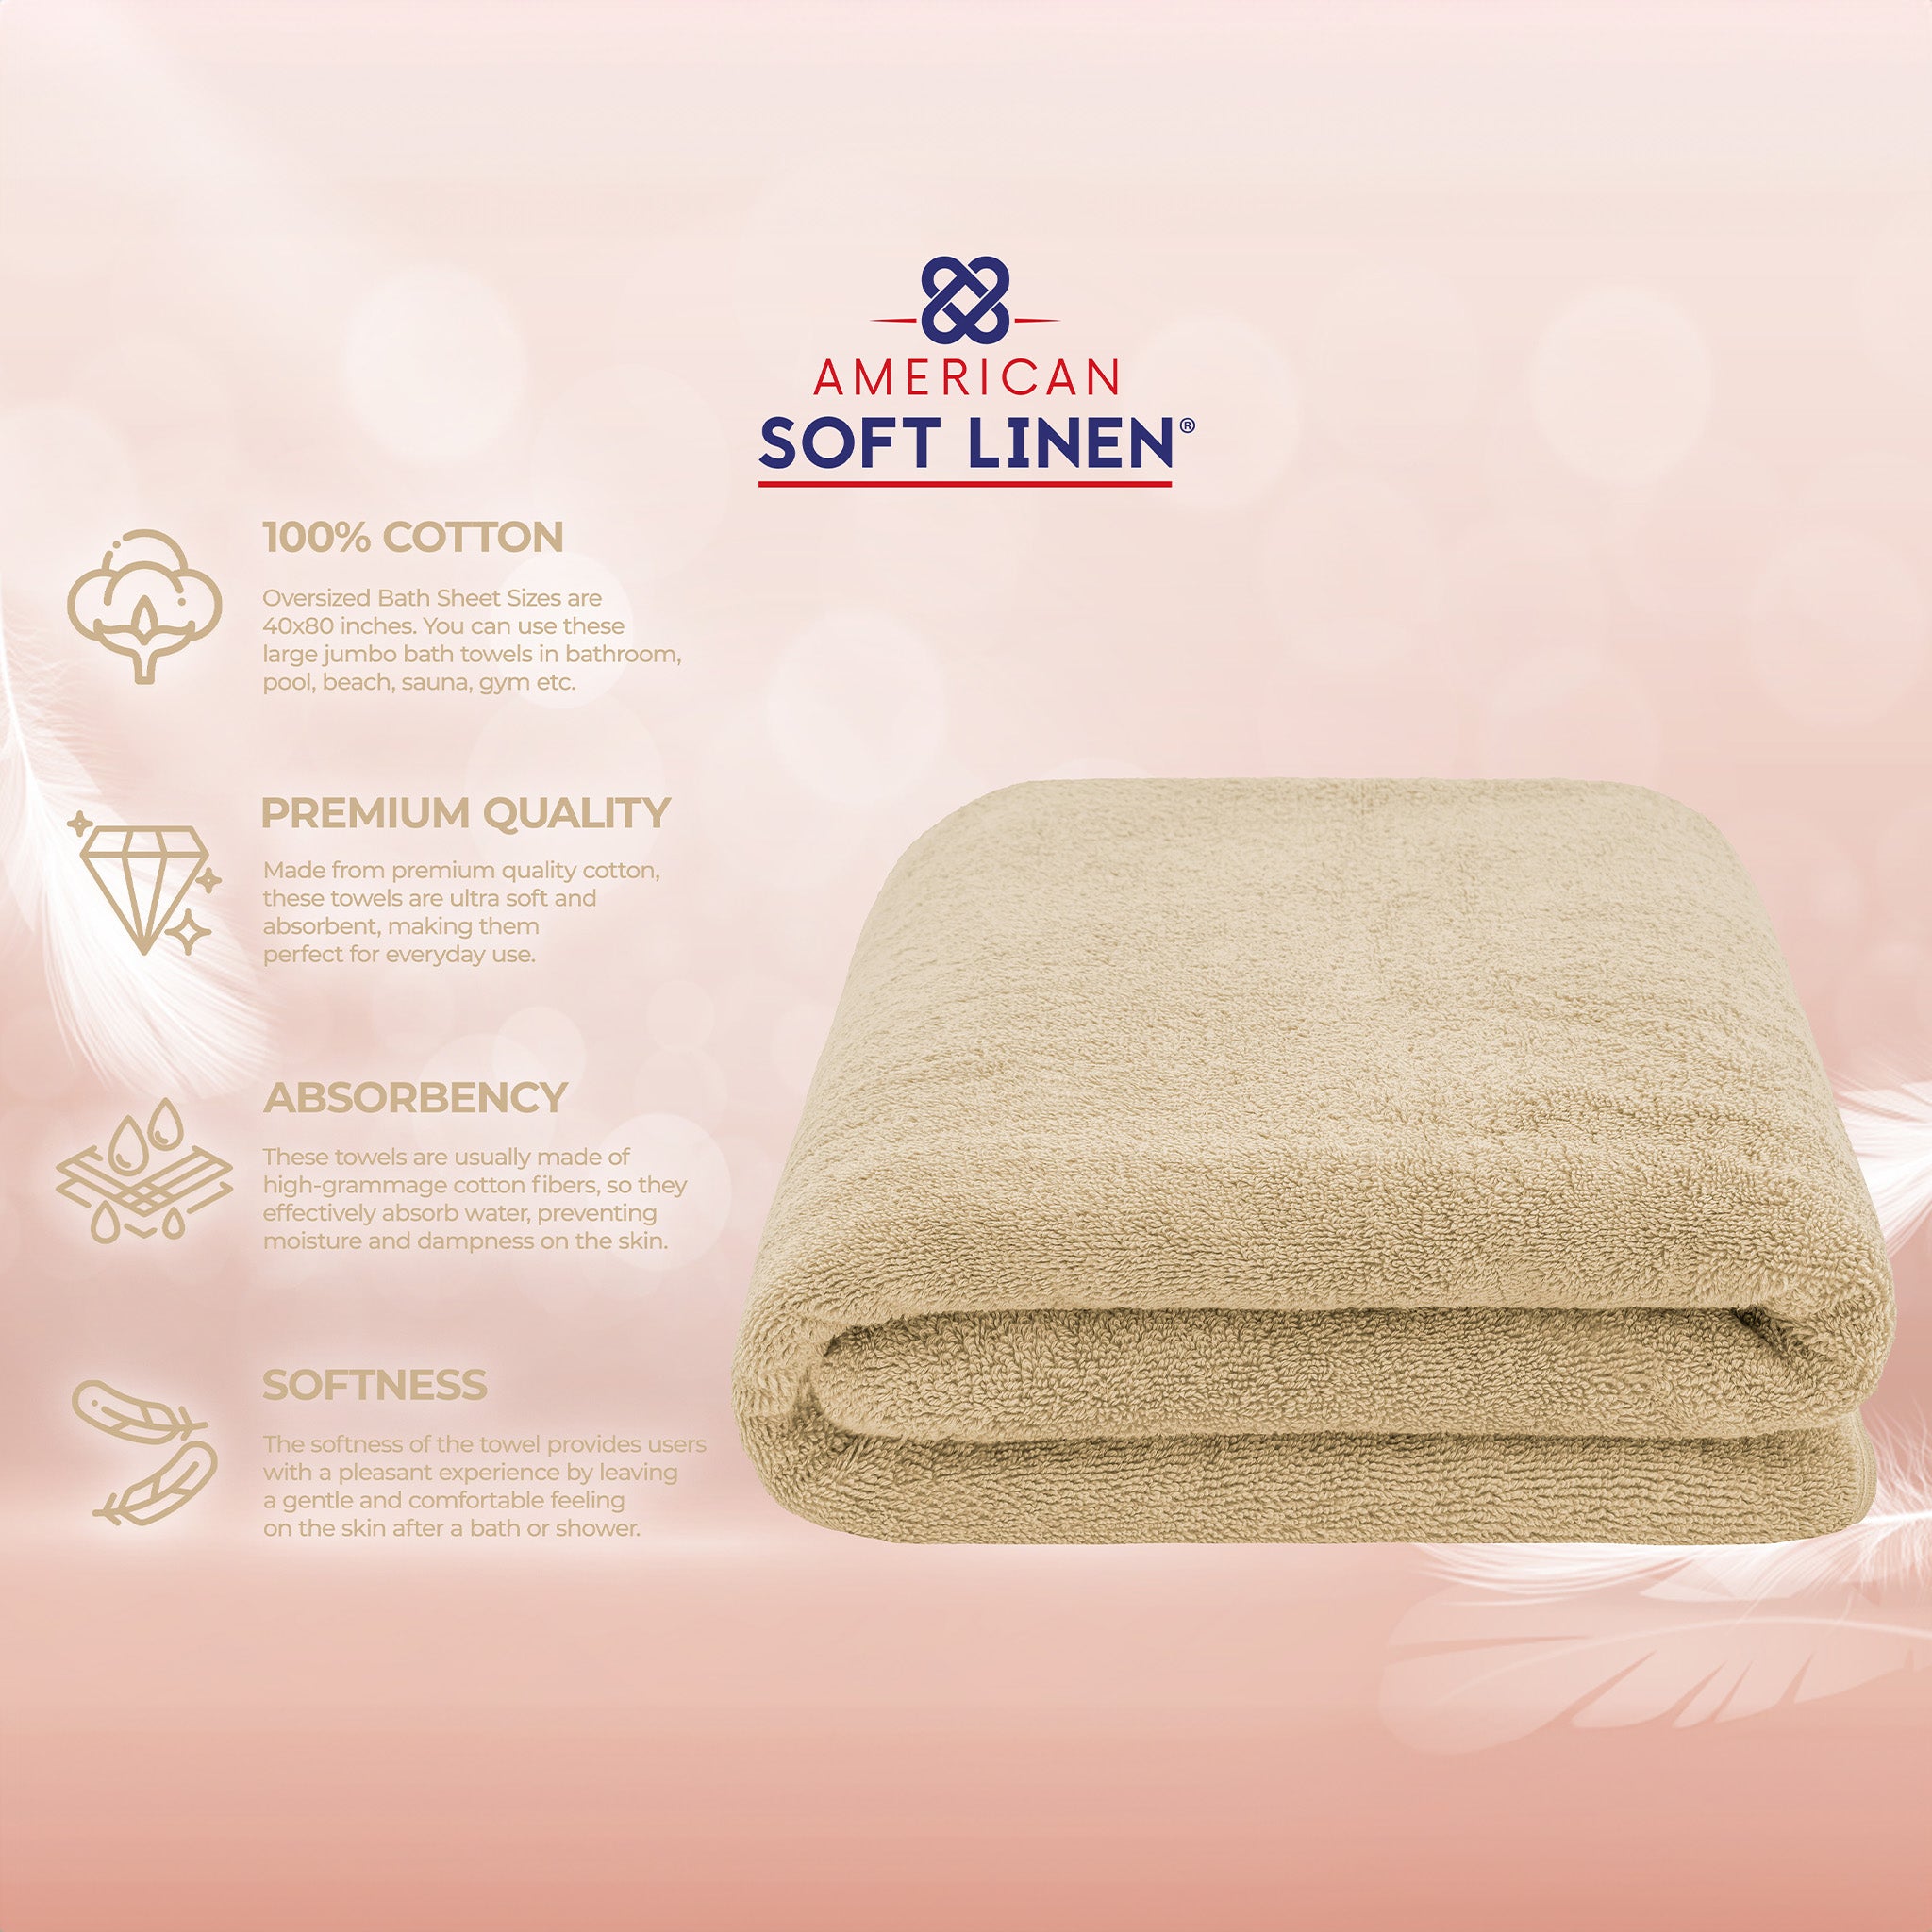 American Soft Linen 100% Ring Spun Cotton 40x80 Inches Oversized Bath Sheets sand-taupe-4